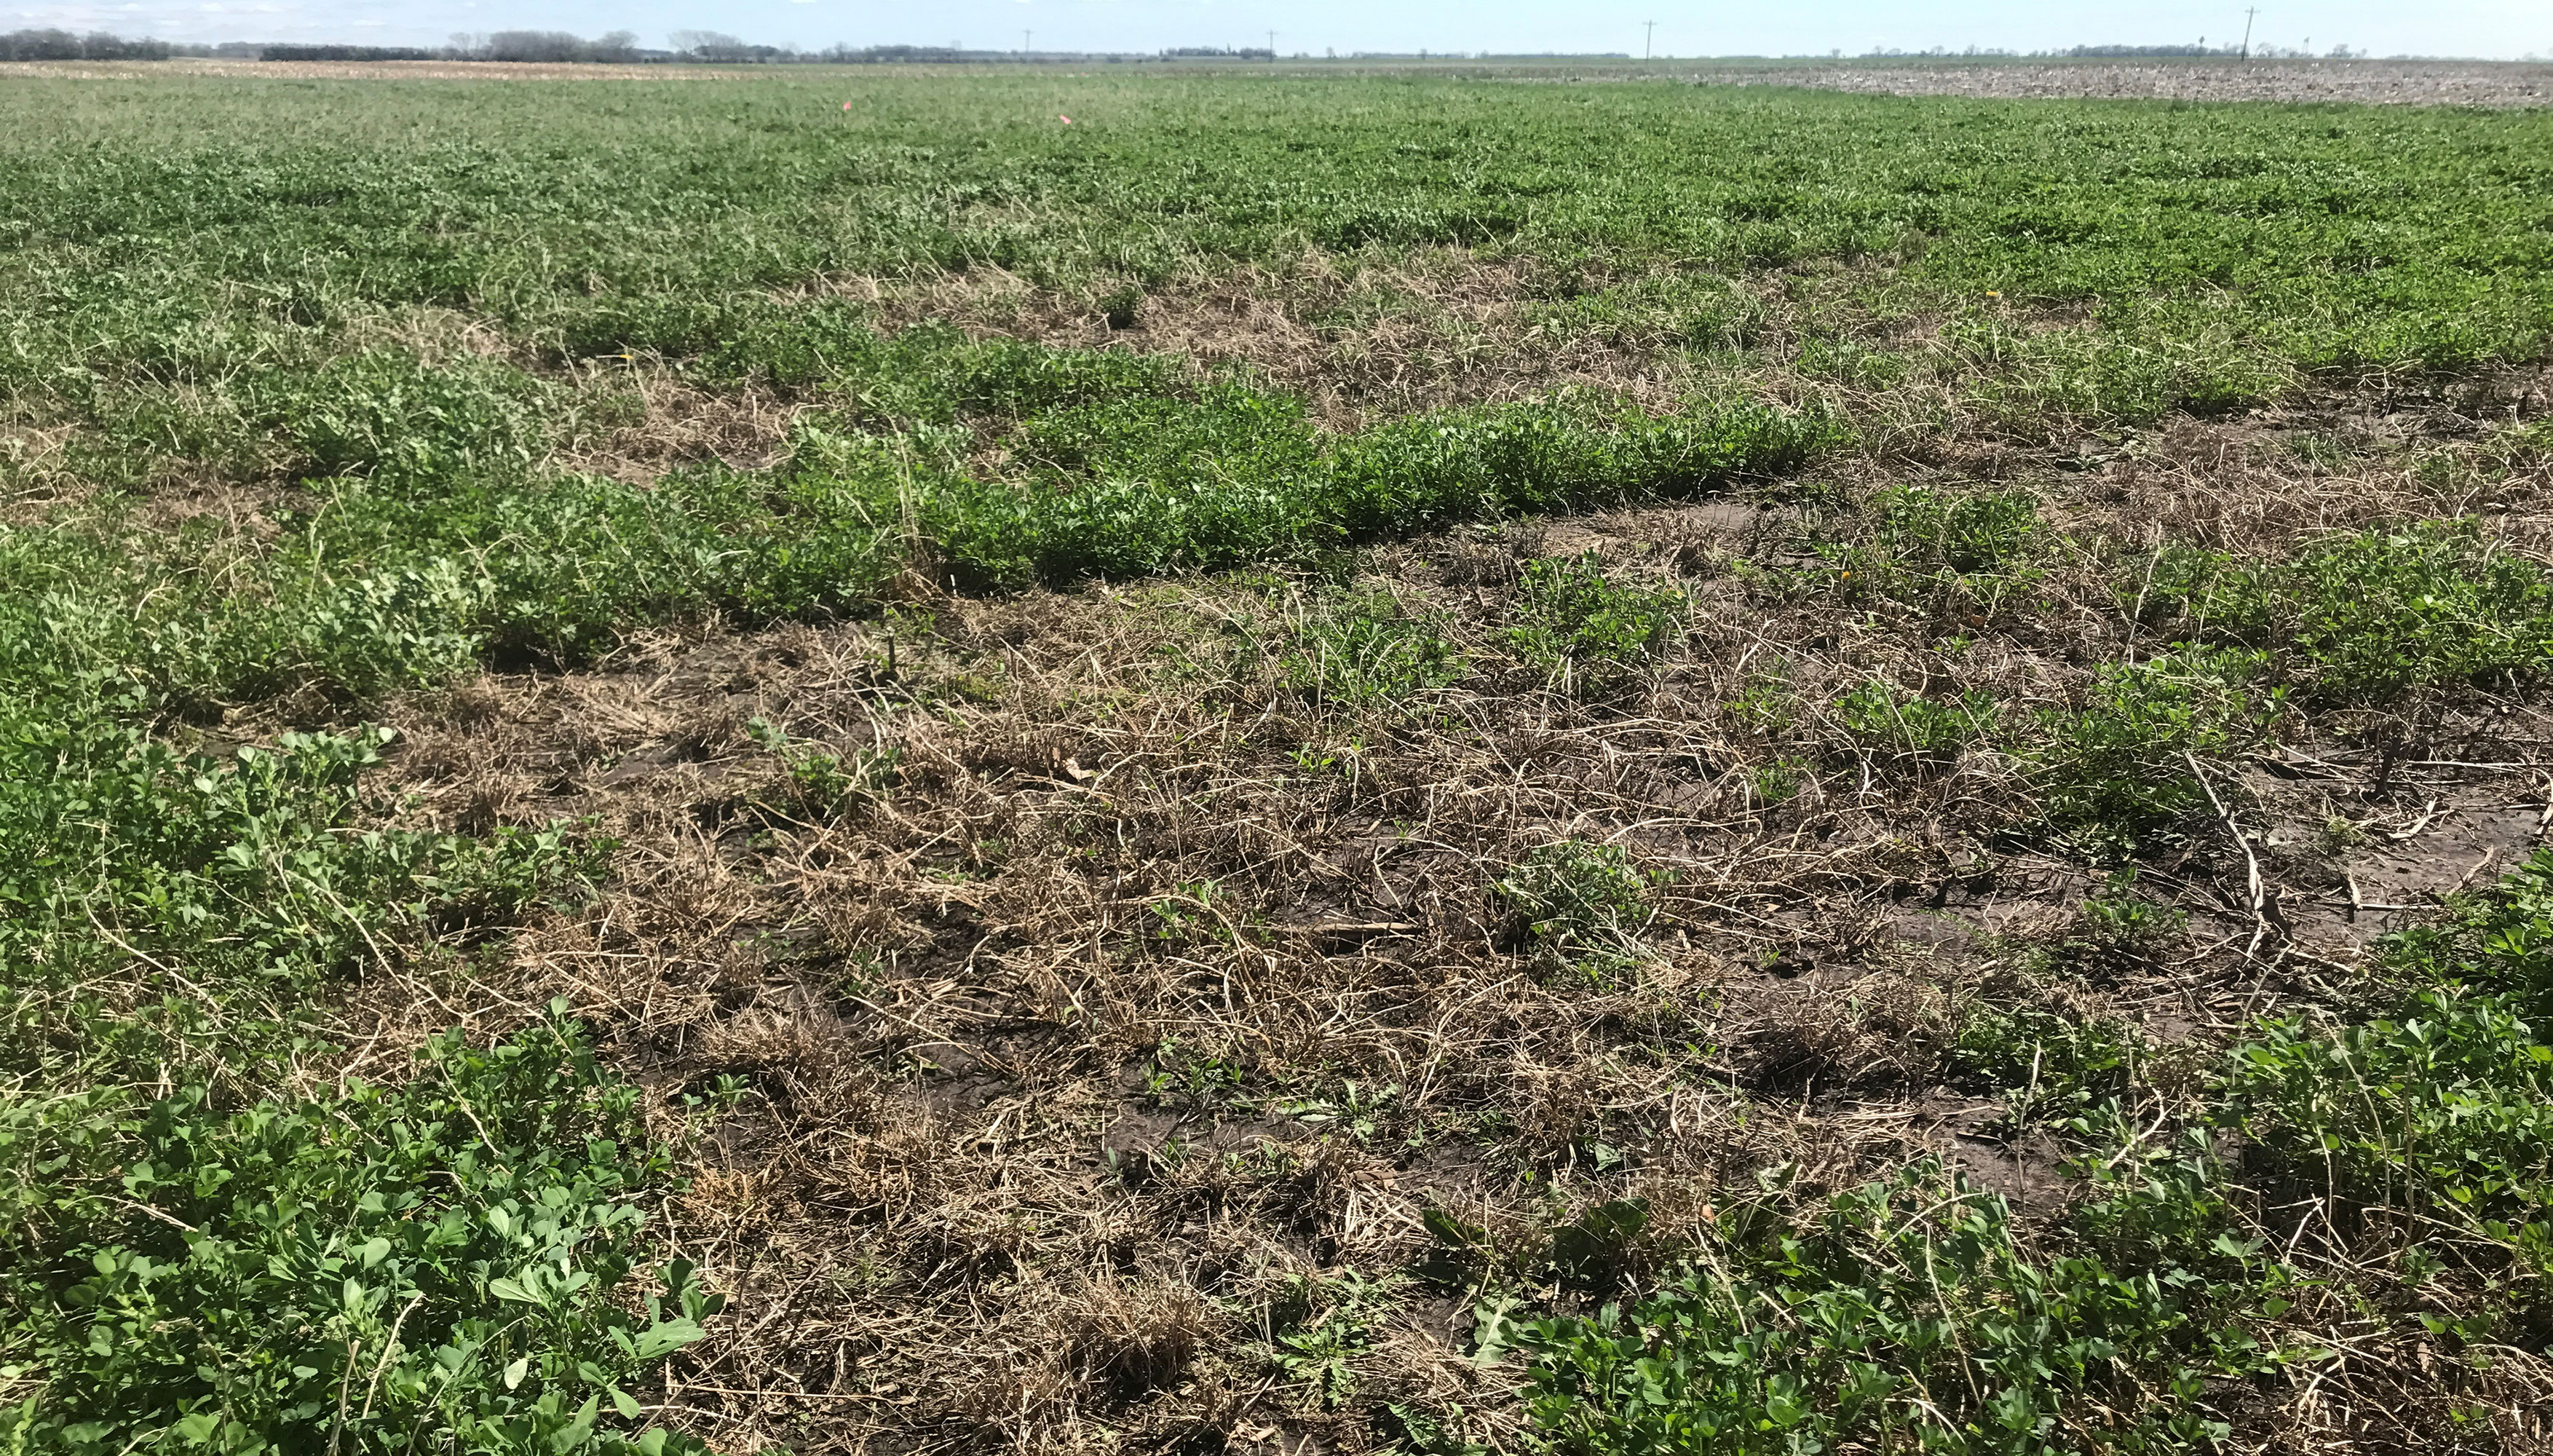 An alfalfa field with noticeable dead patches due to winter kill.